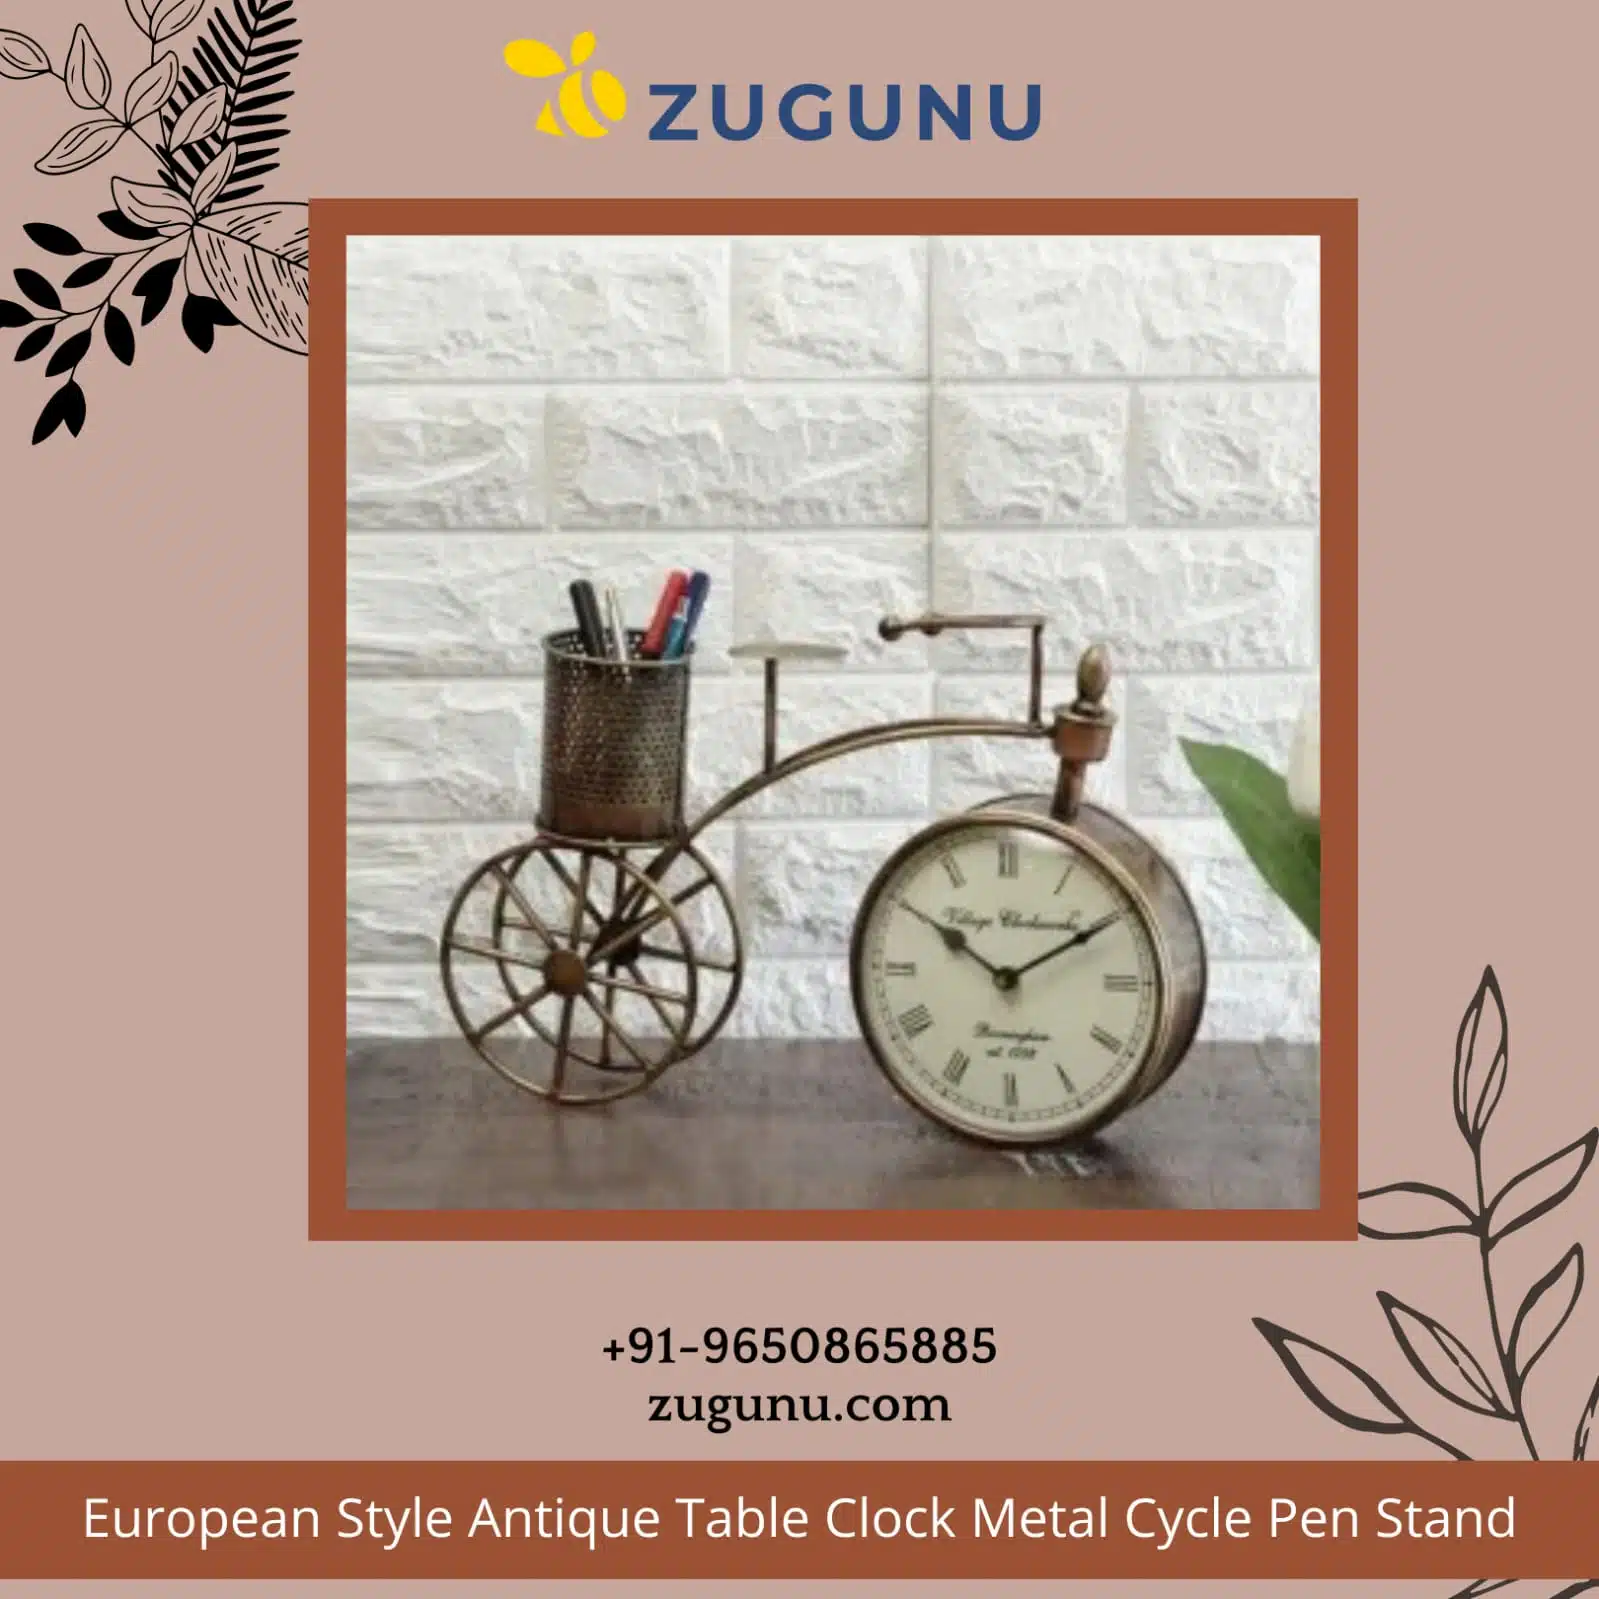 Antique Table Clock Metal Cycle Pen Stand From Zugunu